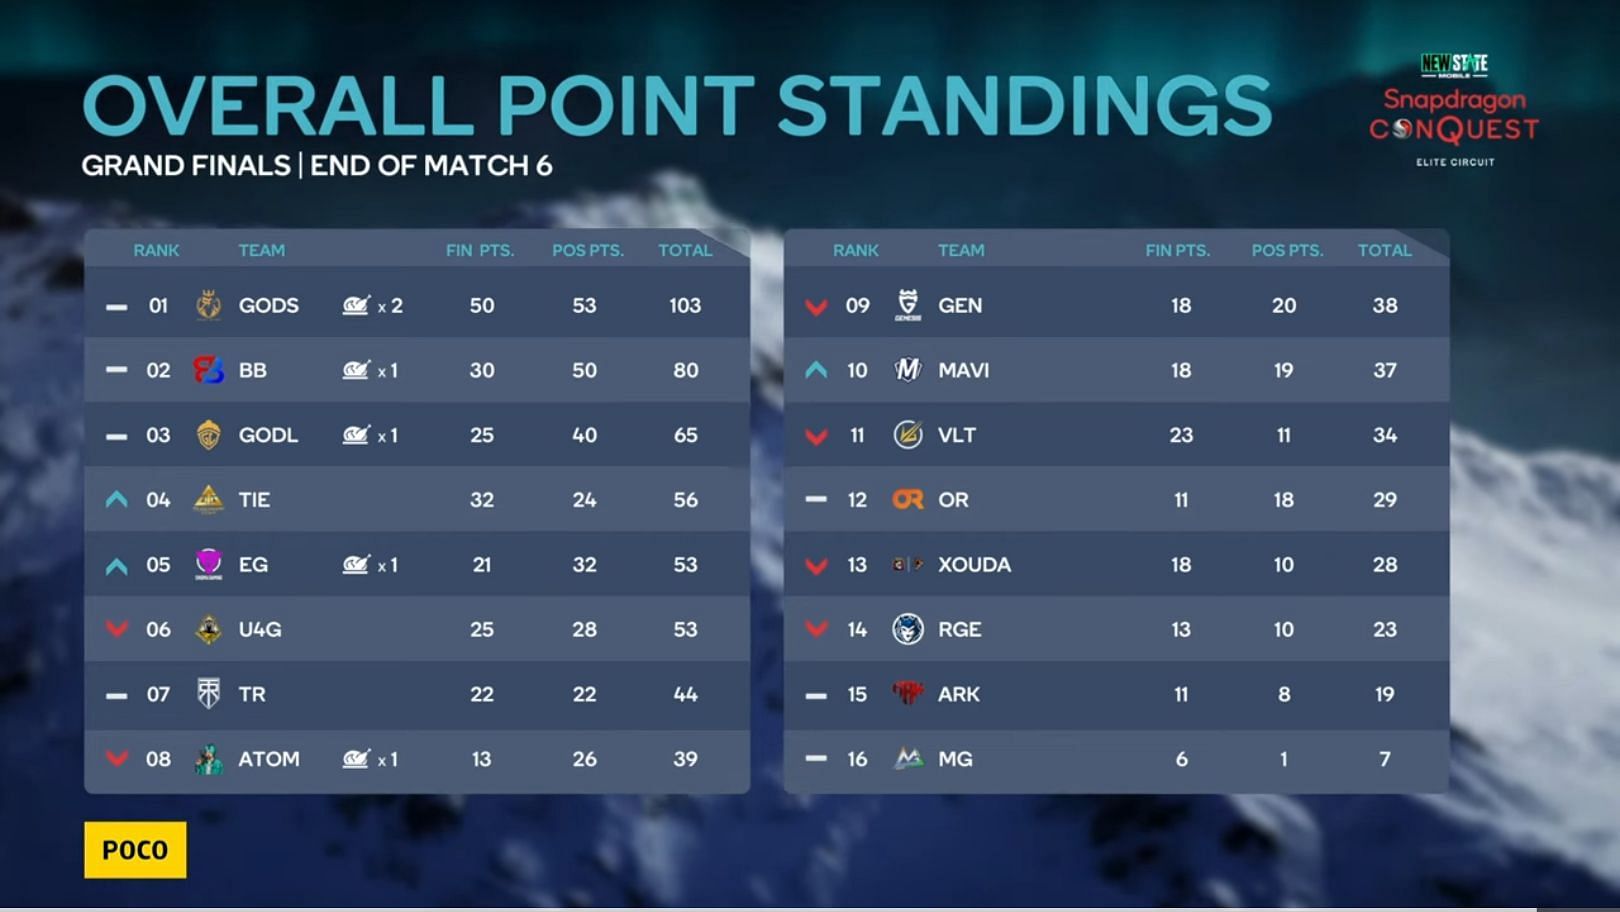 Day 1 points table of Snapdragon Conquest Finals (Image via Snapdragon)